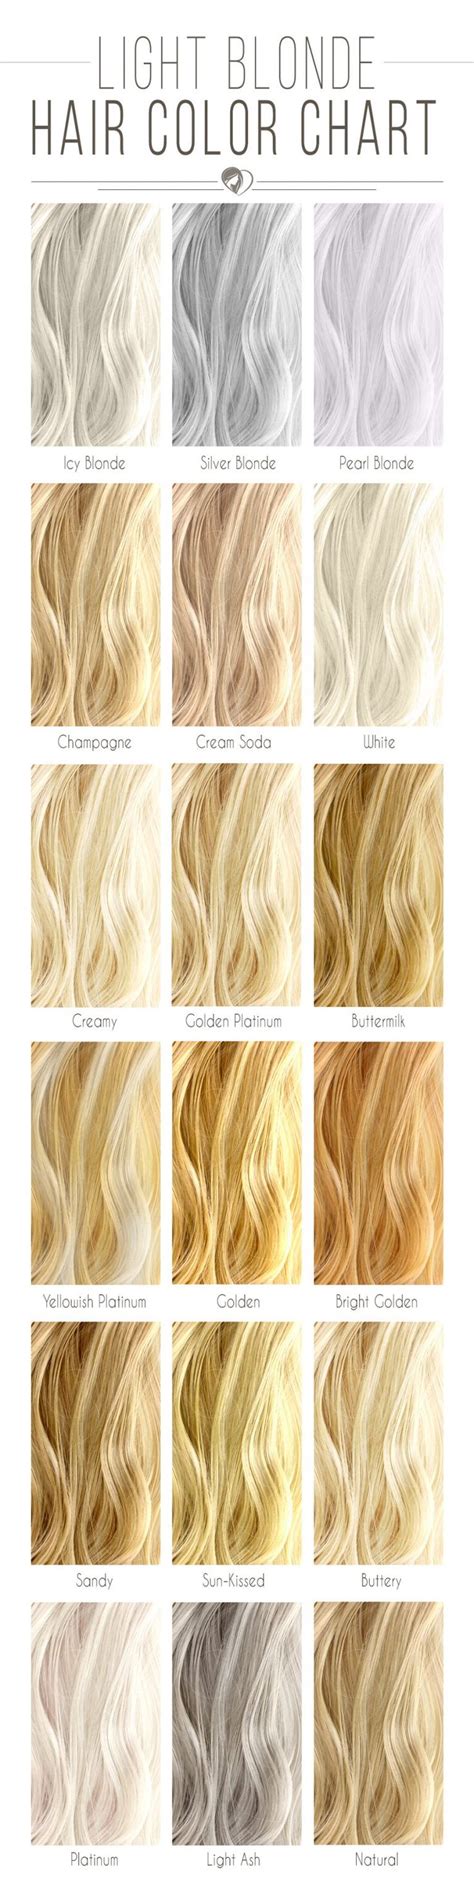 Blonde Hair Color Chart To Find The Right Shade For You Hair Color